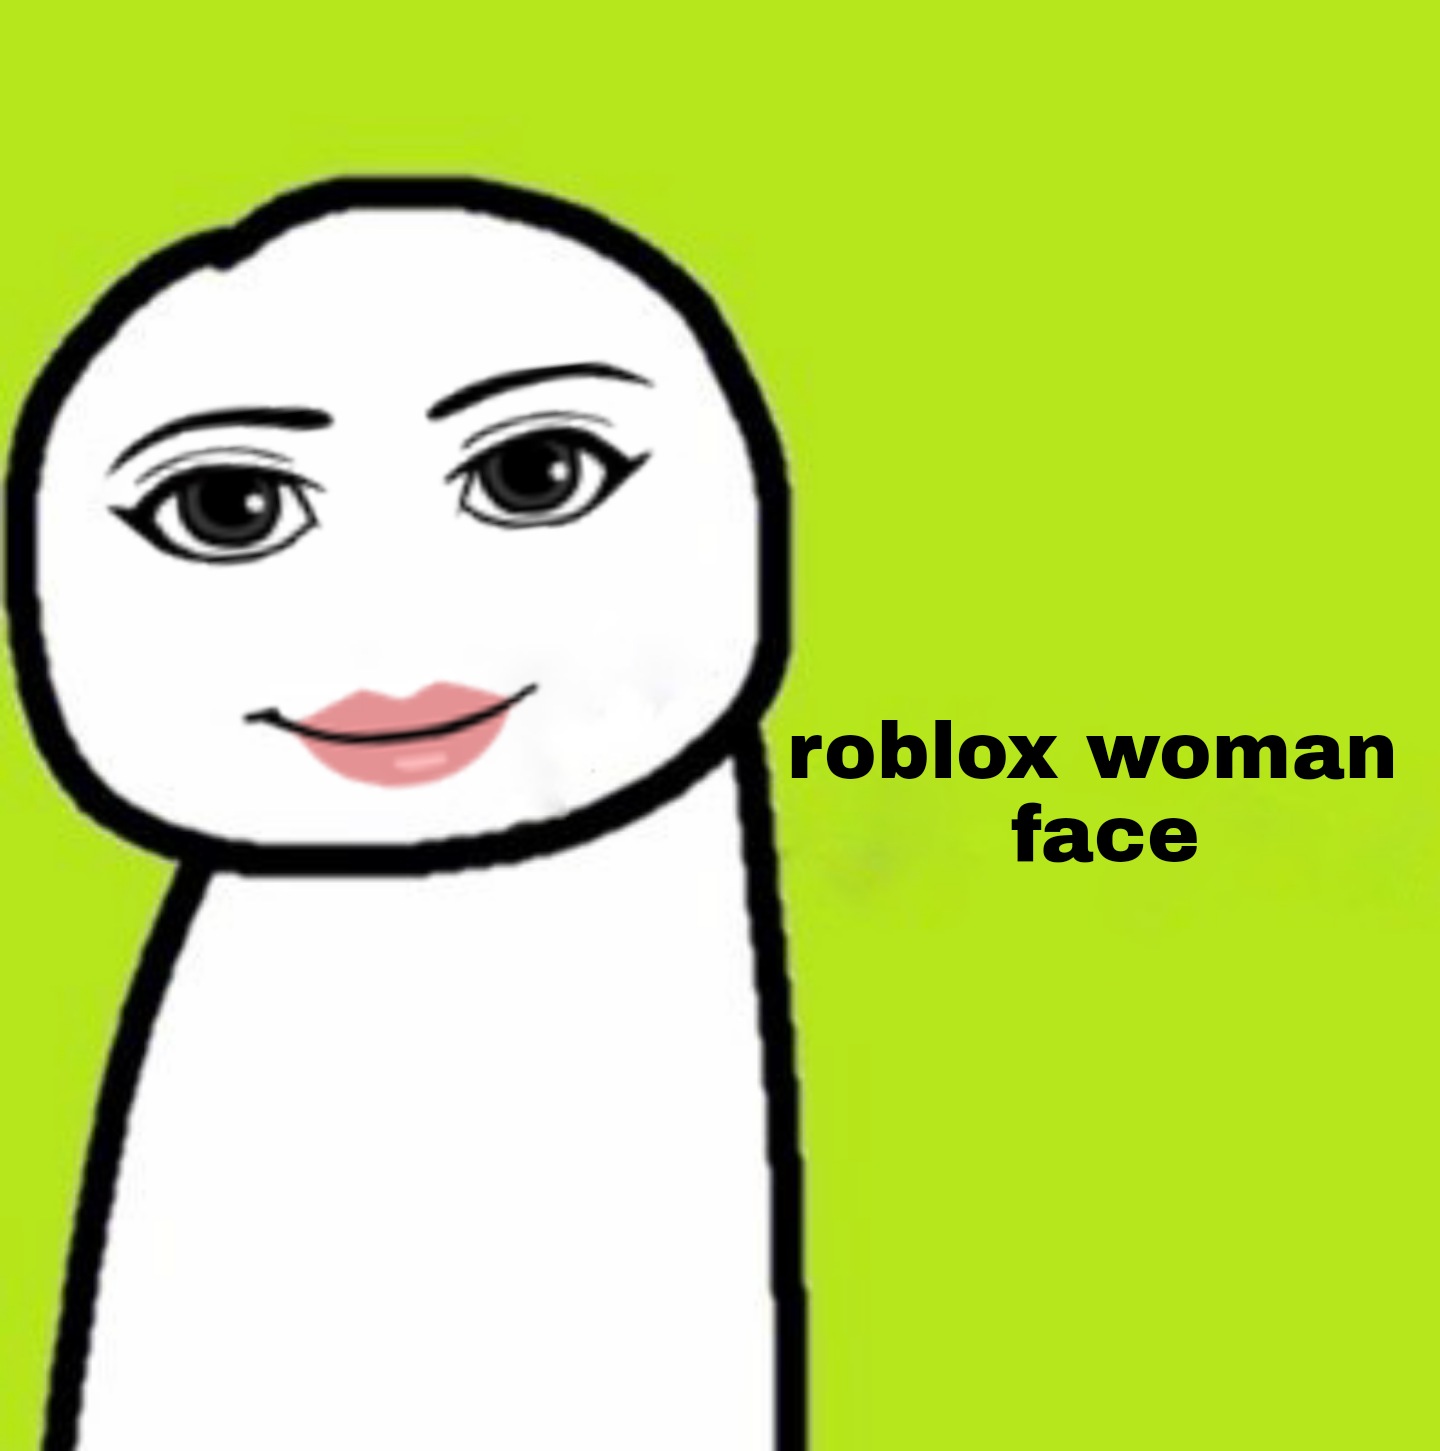 random images but the roblox woman face is on it on X:   / X